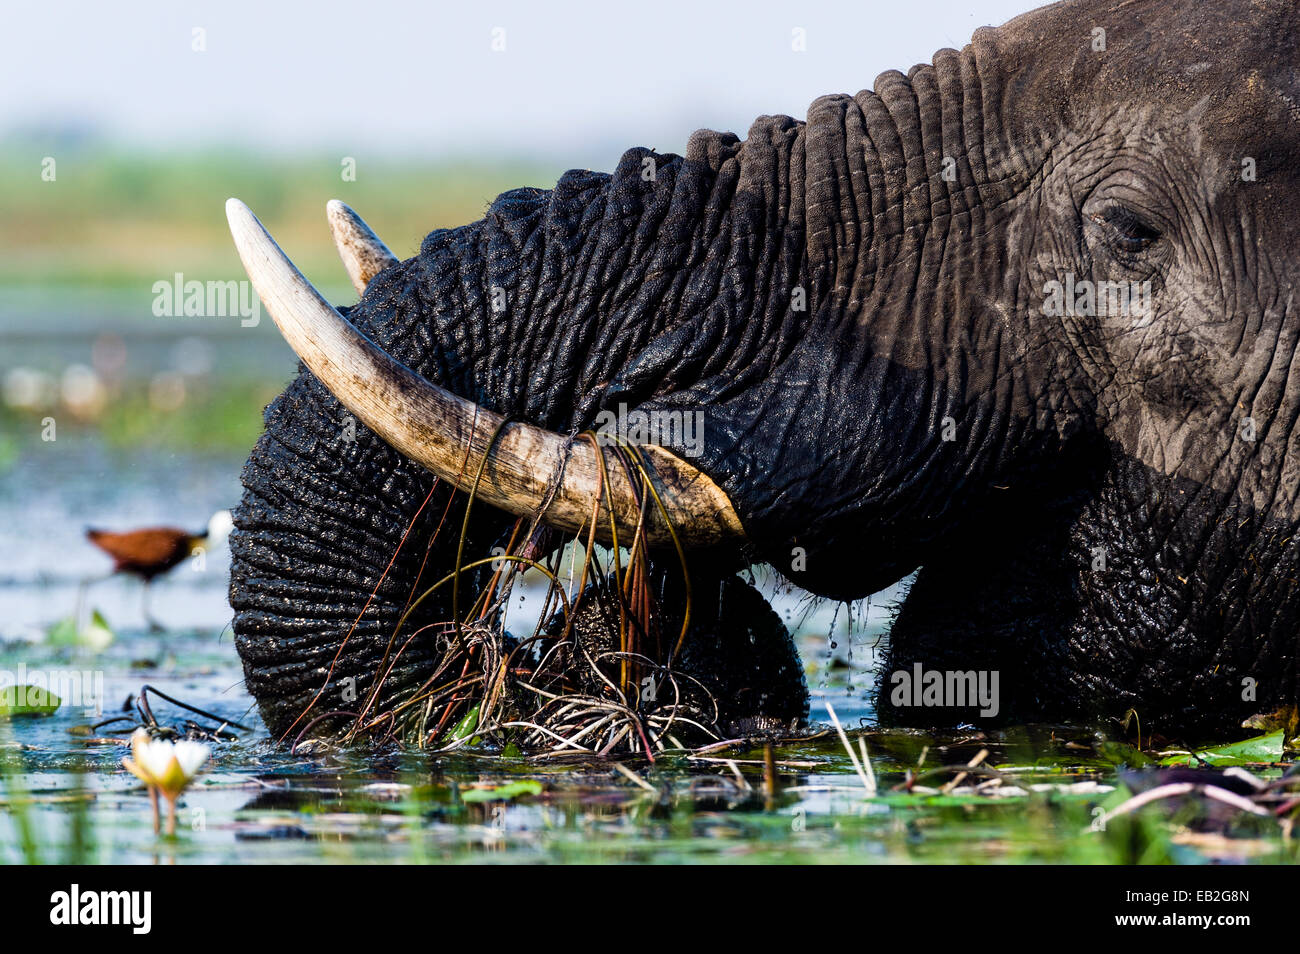 African Elephants pull up water plants to eat using tusks and trunk. Stock Photo